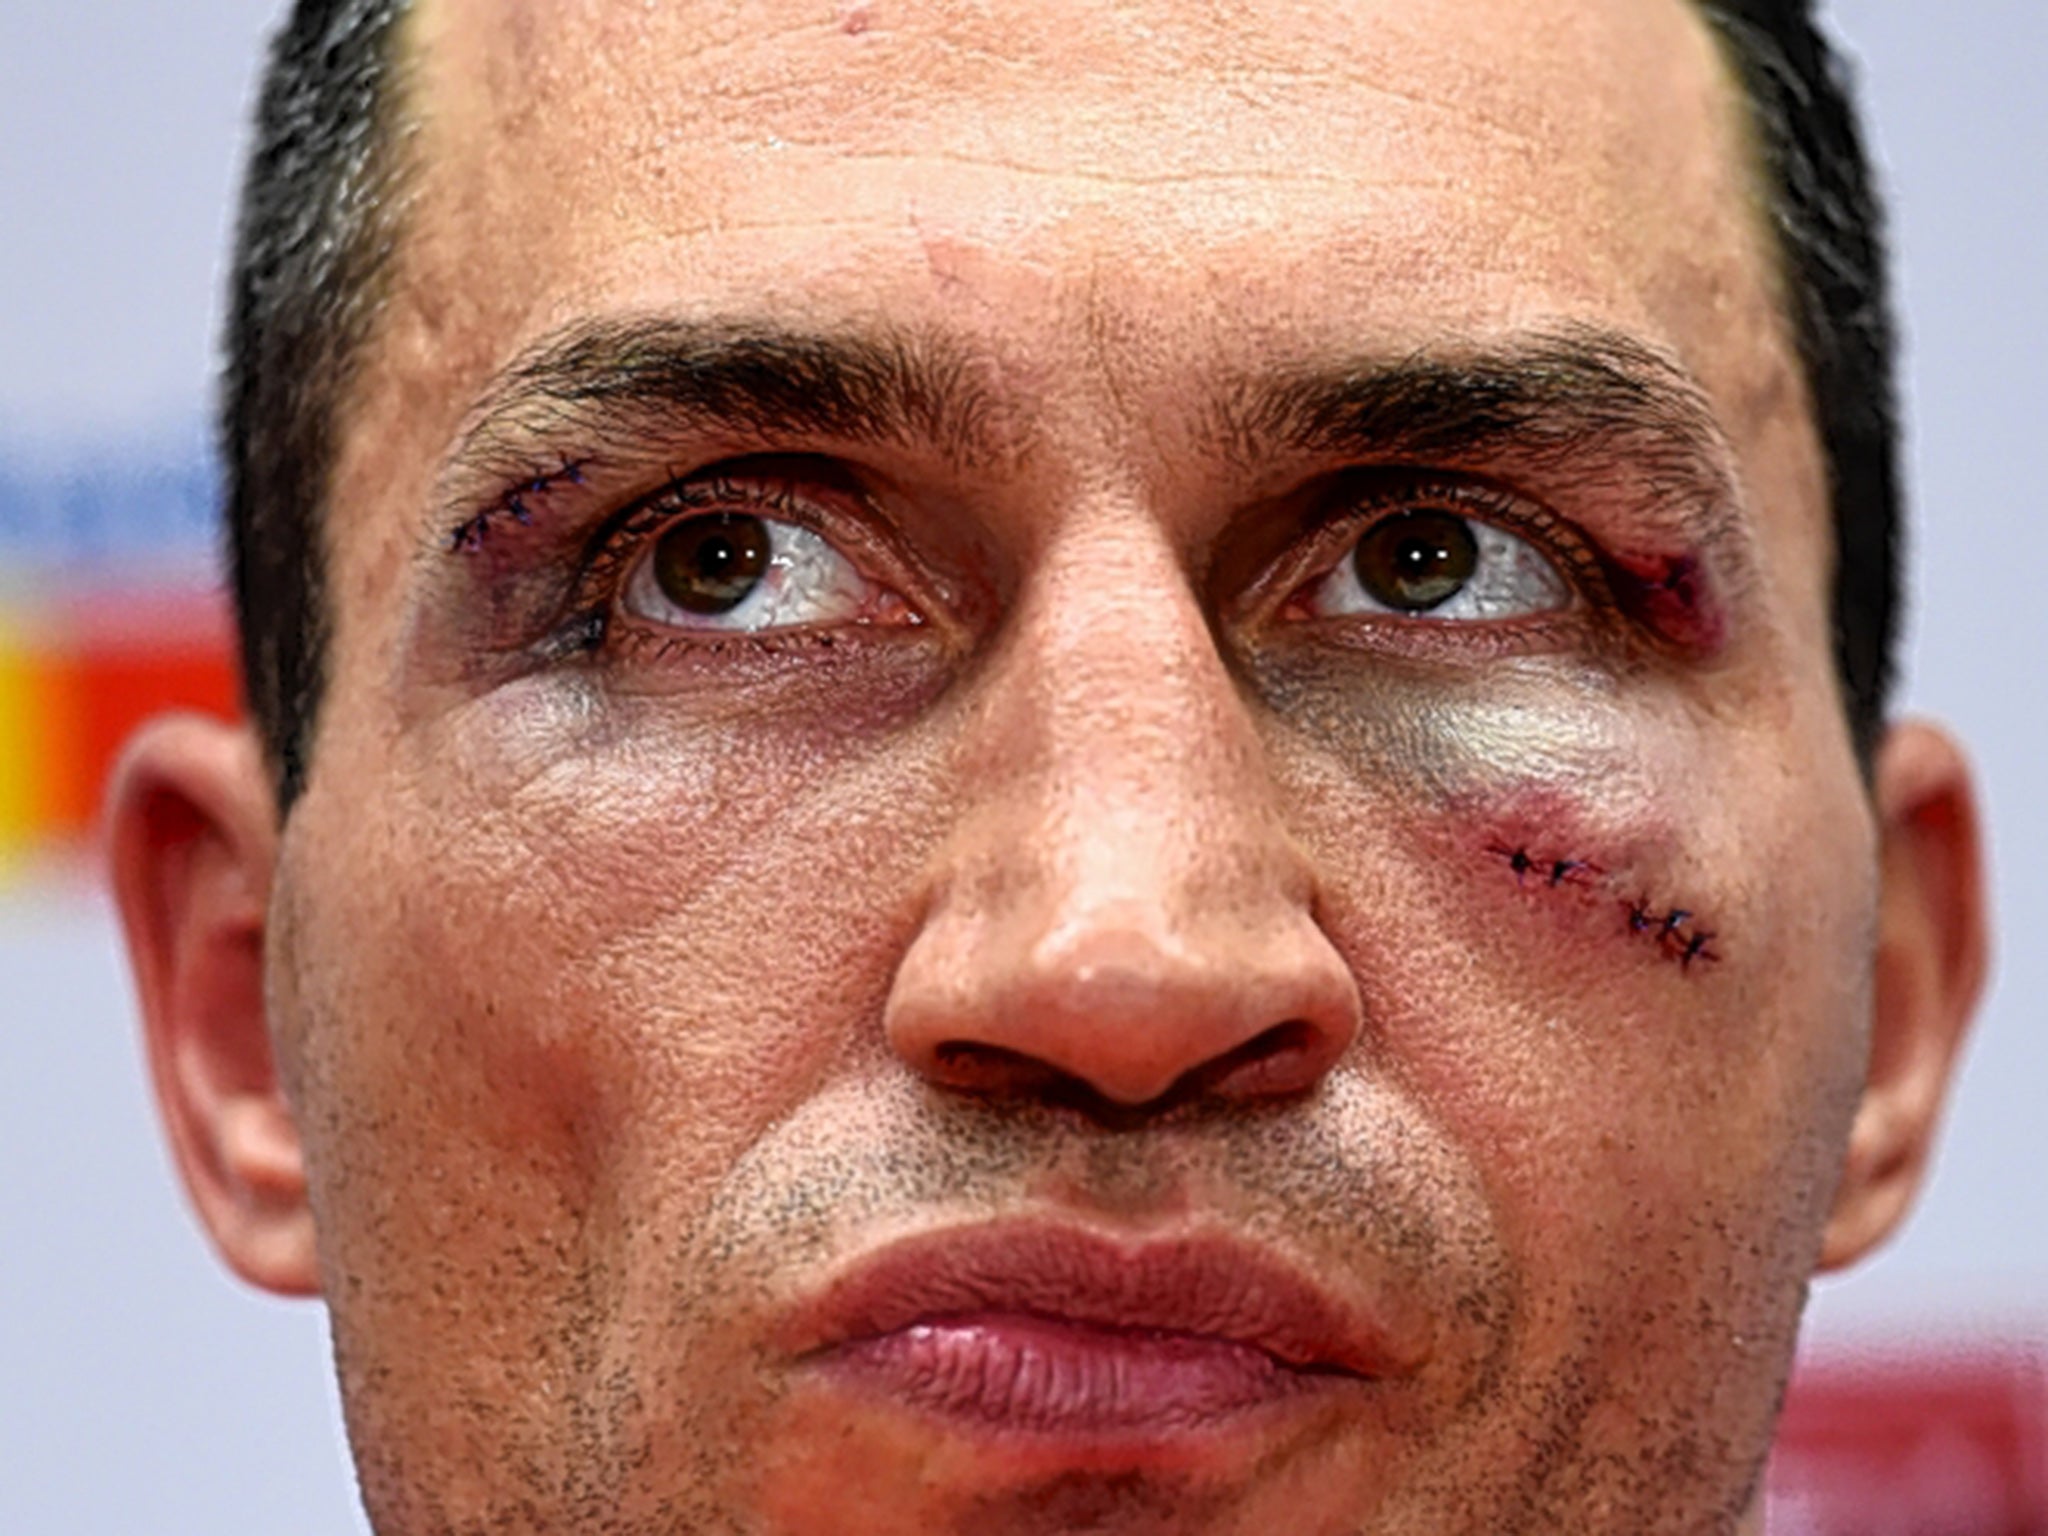 Wladimir Klitschko shows the effects of his loss by Tyson Fury in the post-fight press conference